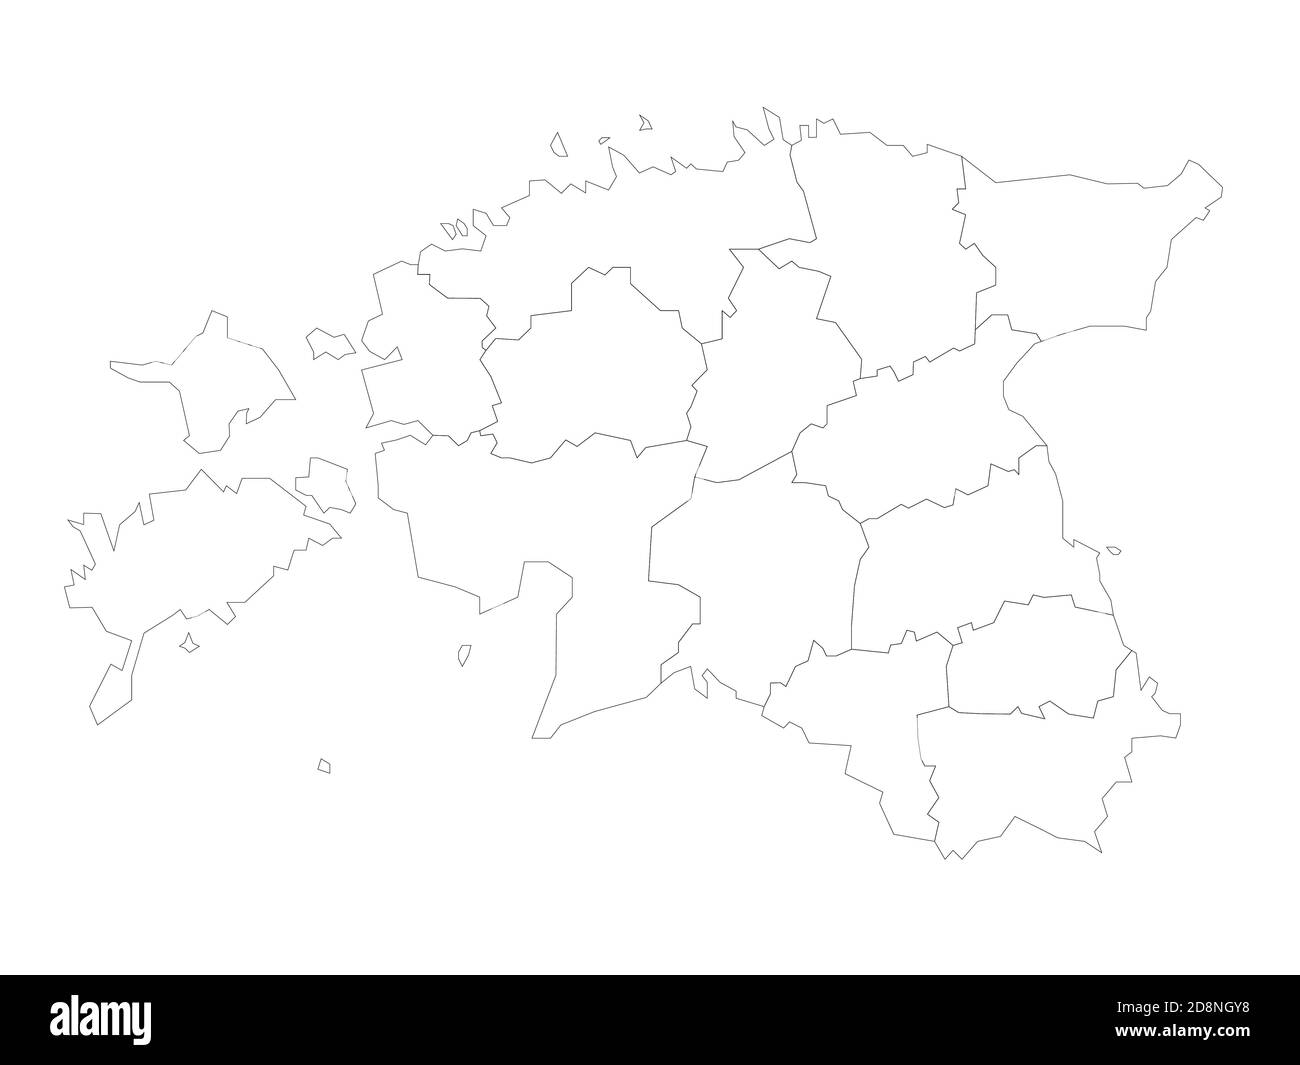 Blank political map of Estonia. Administrative divisions - counties. Simple black outline vector map Stock Vector